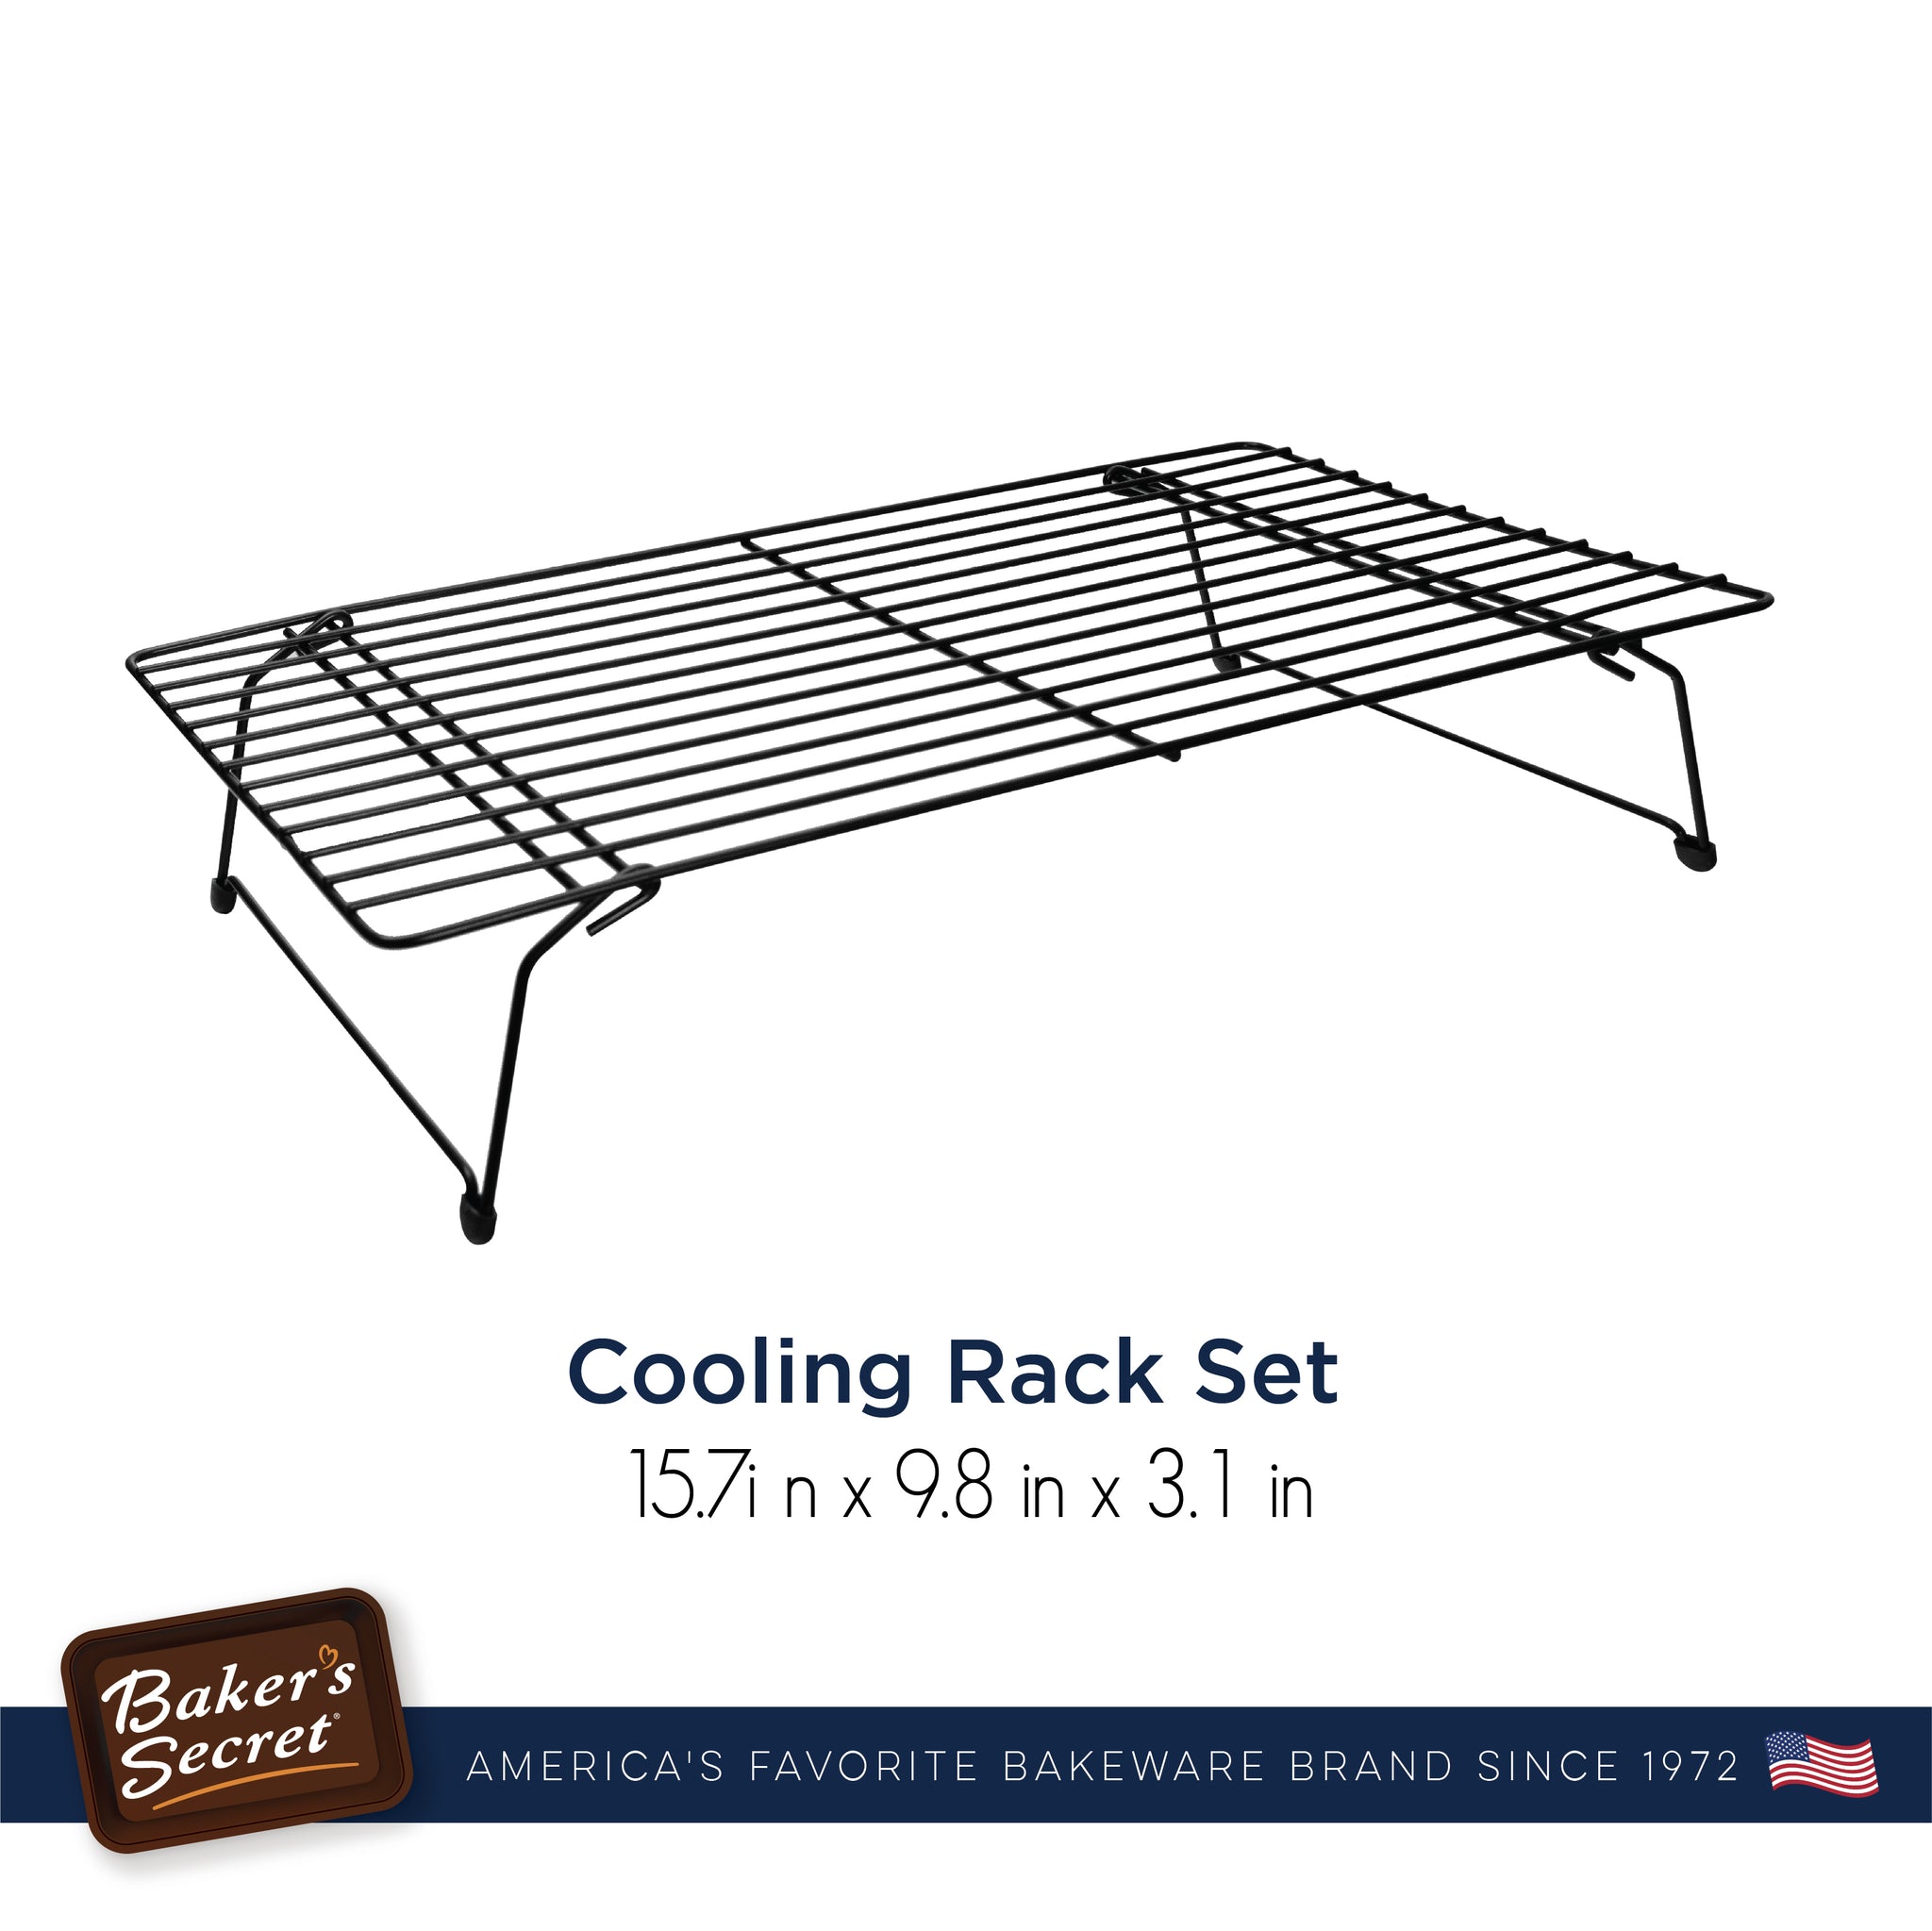 Nordic Ware Baking and Cooling Rack Set- Silver, 3 Piece - Harris Teeter